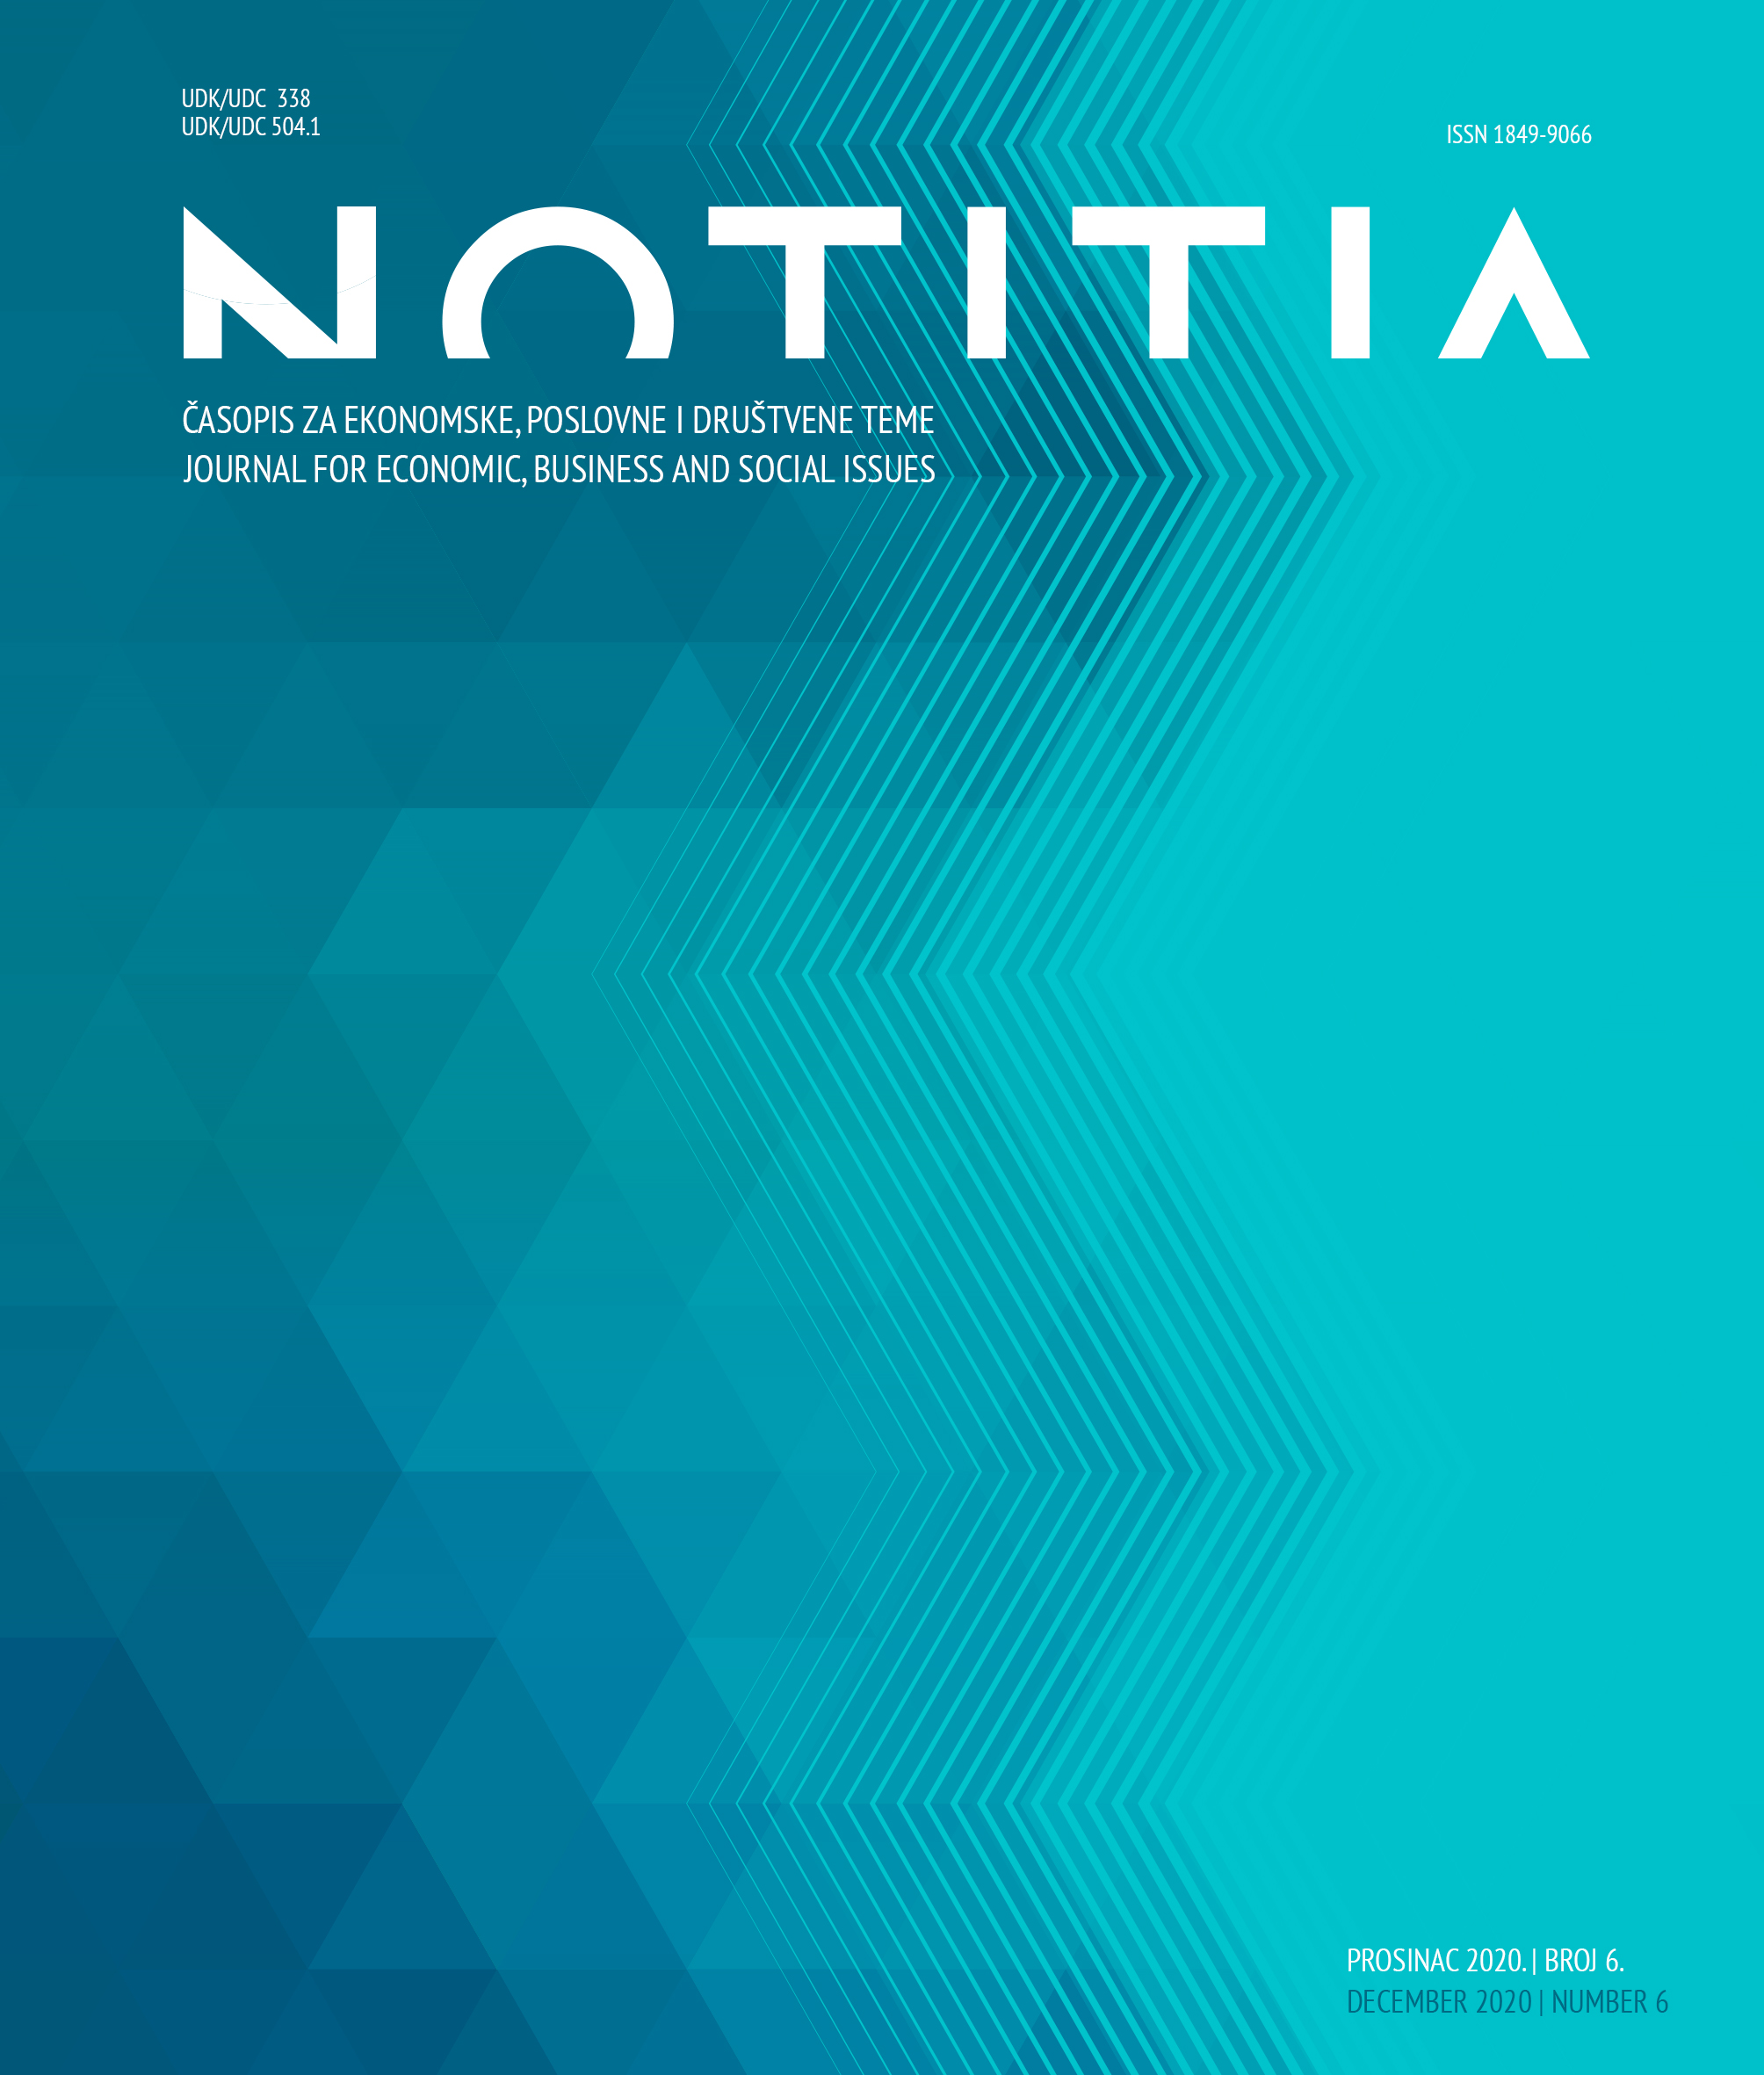 logo Notitia - journal for economic, business and social issues